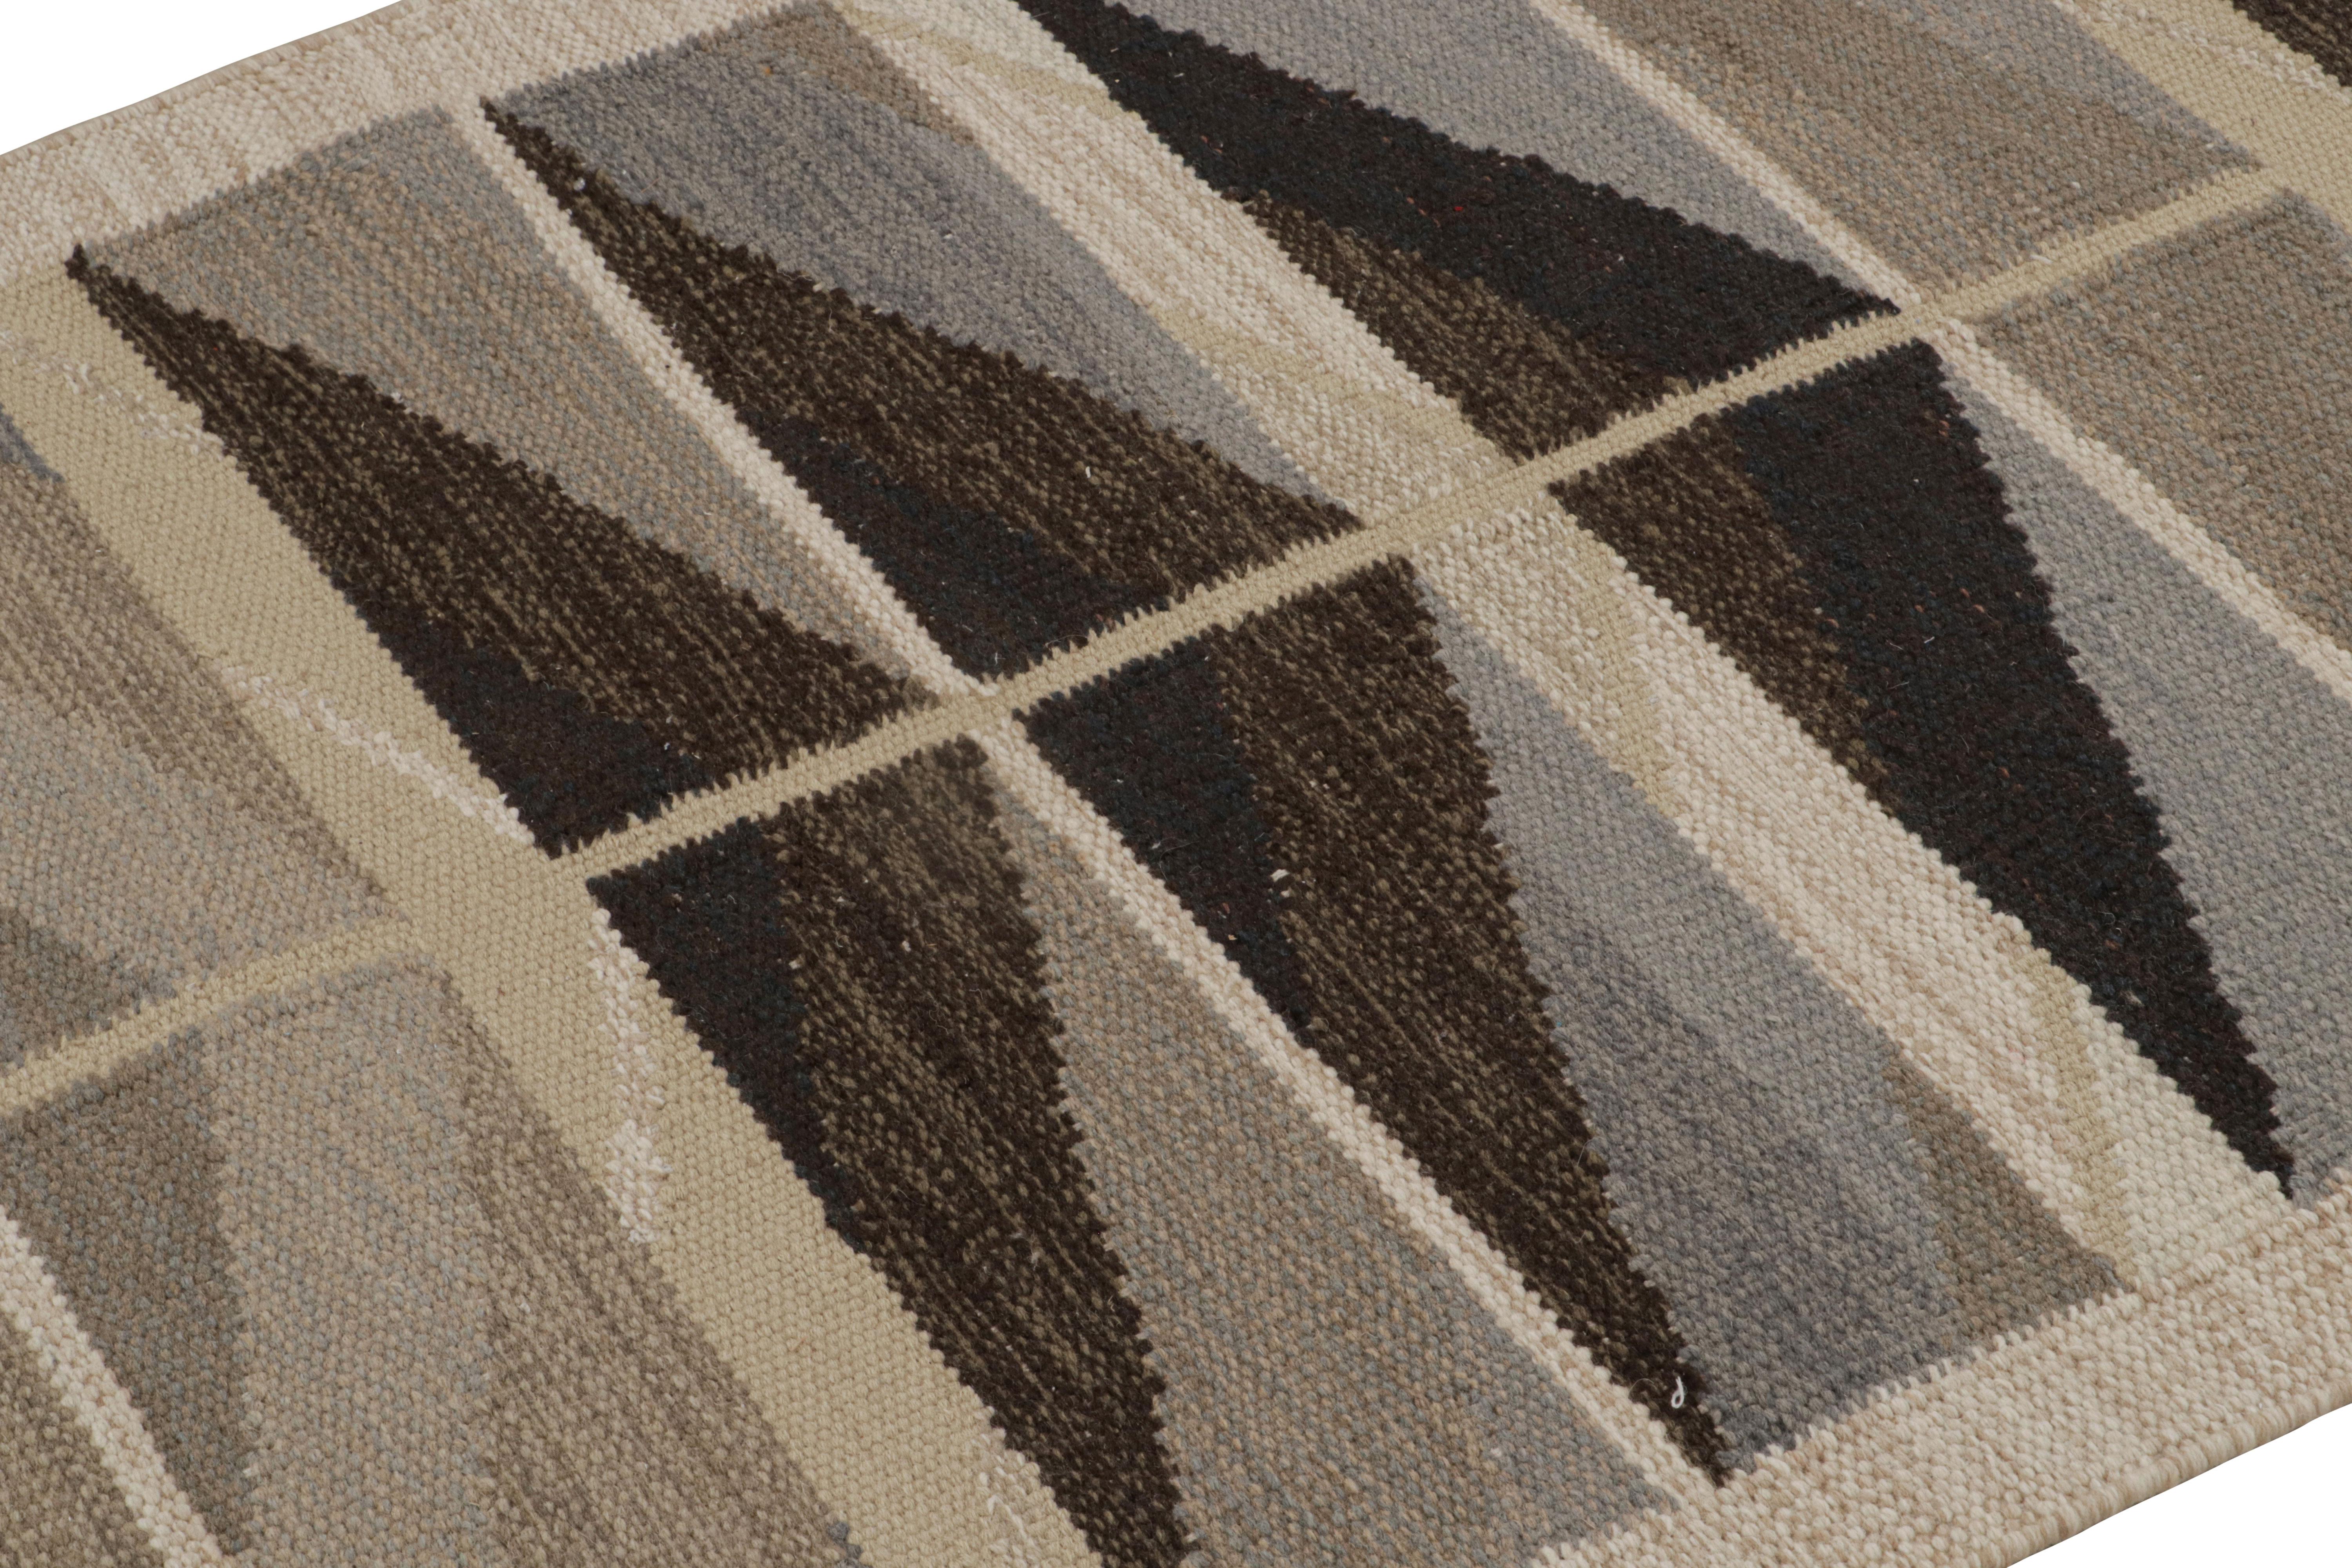 Indian Rug & Kilim’s Scandinavian Style Runner Rug with Beige-Brown Geometric Patterns For Sale